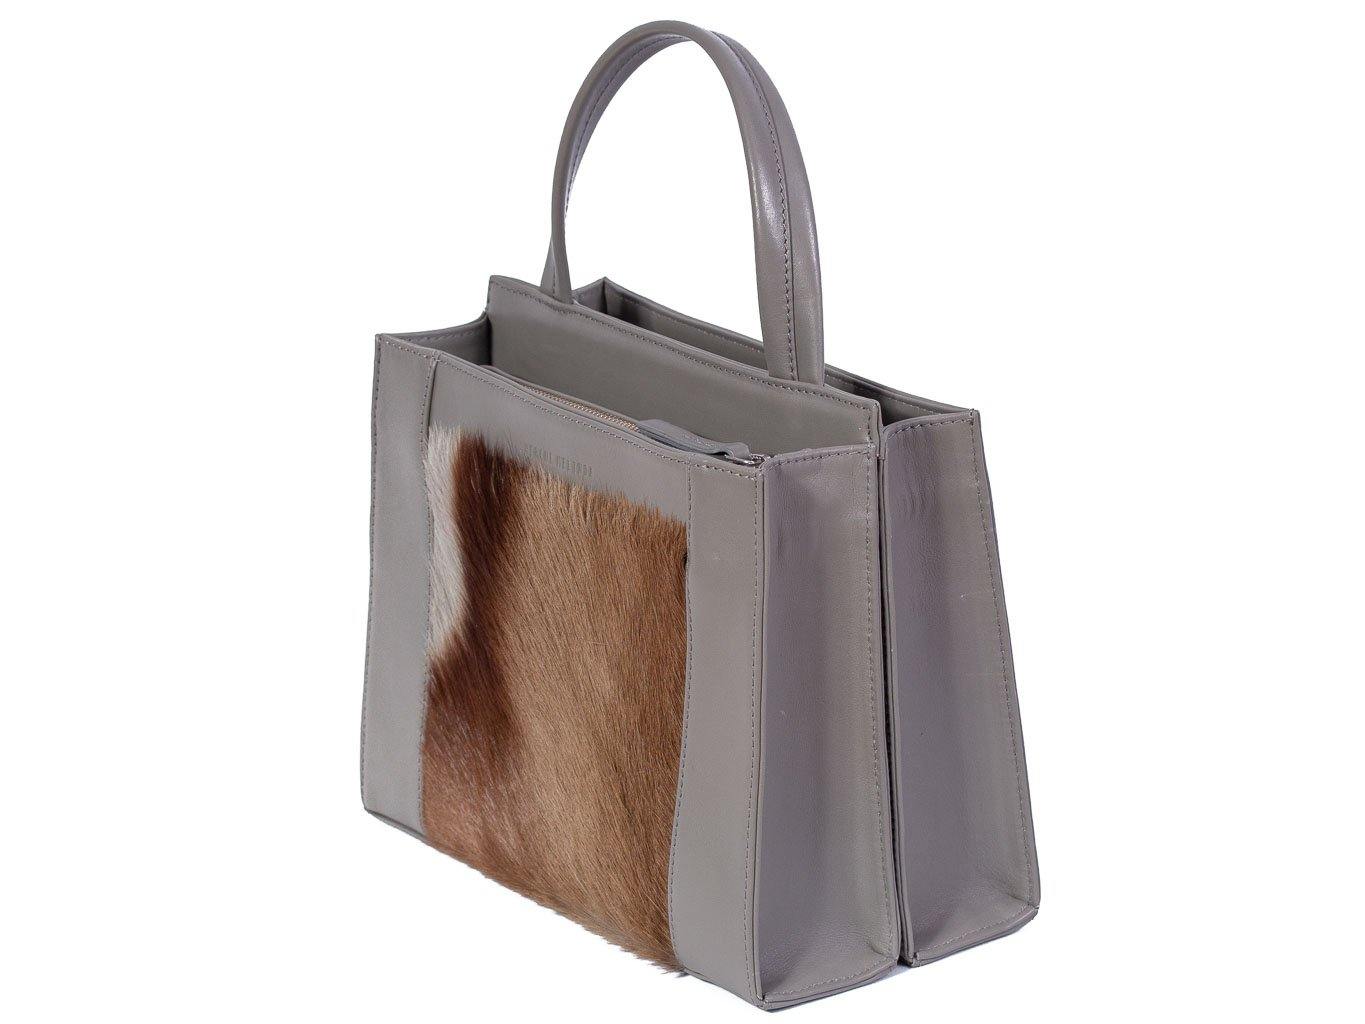 Top Handle Springbok Handbag in Slate Grey with a stripe feature by Sherene Melinda side angle